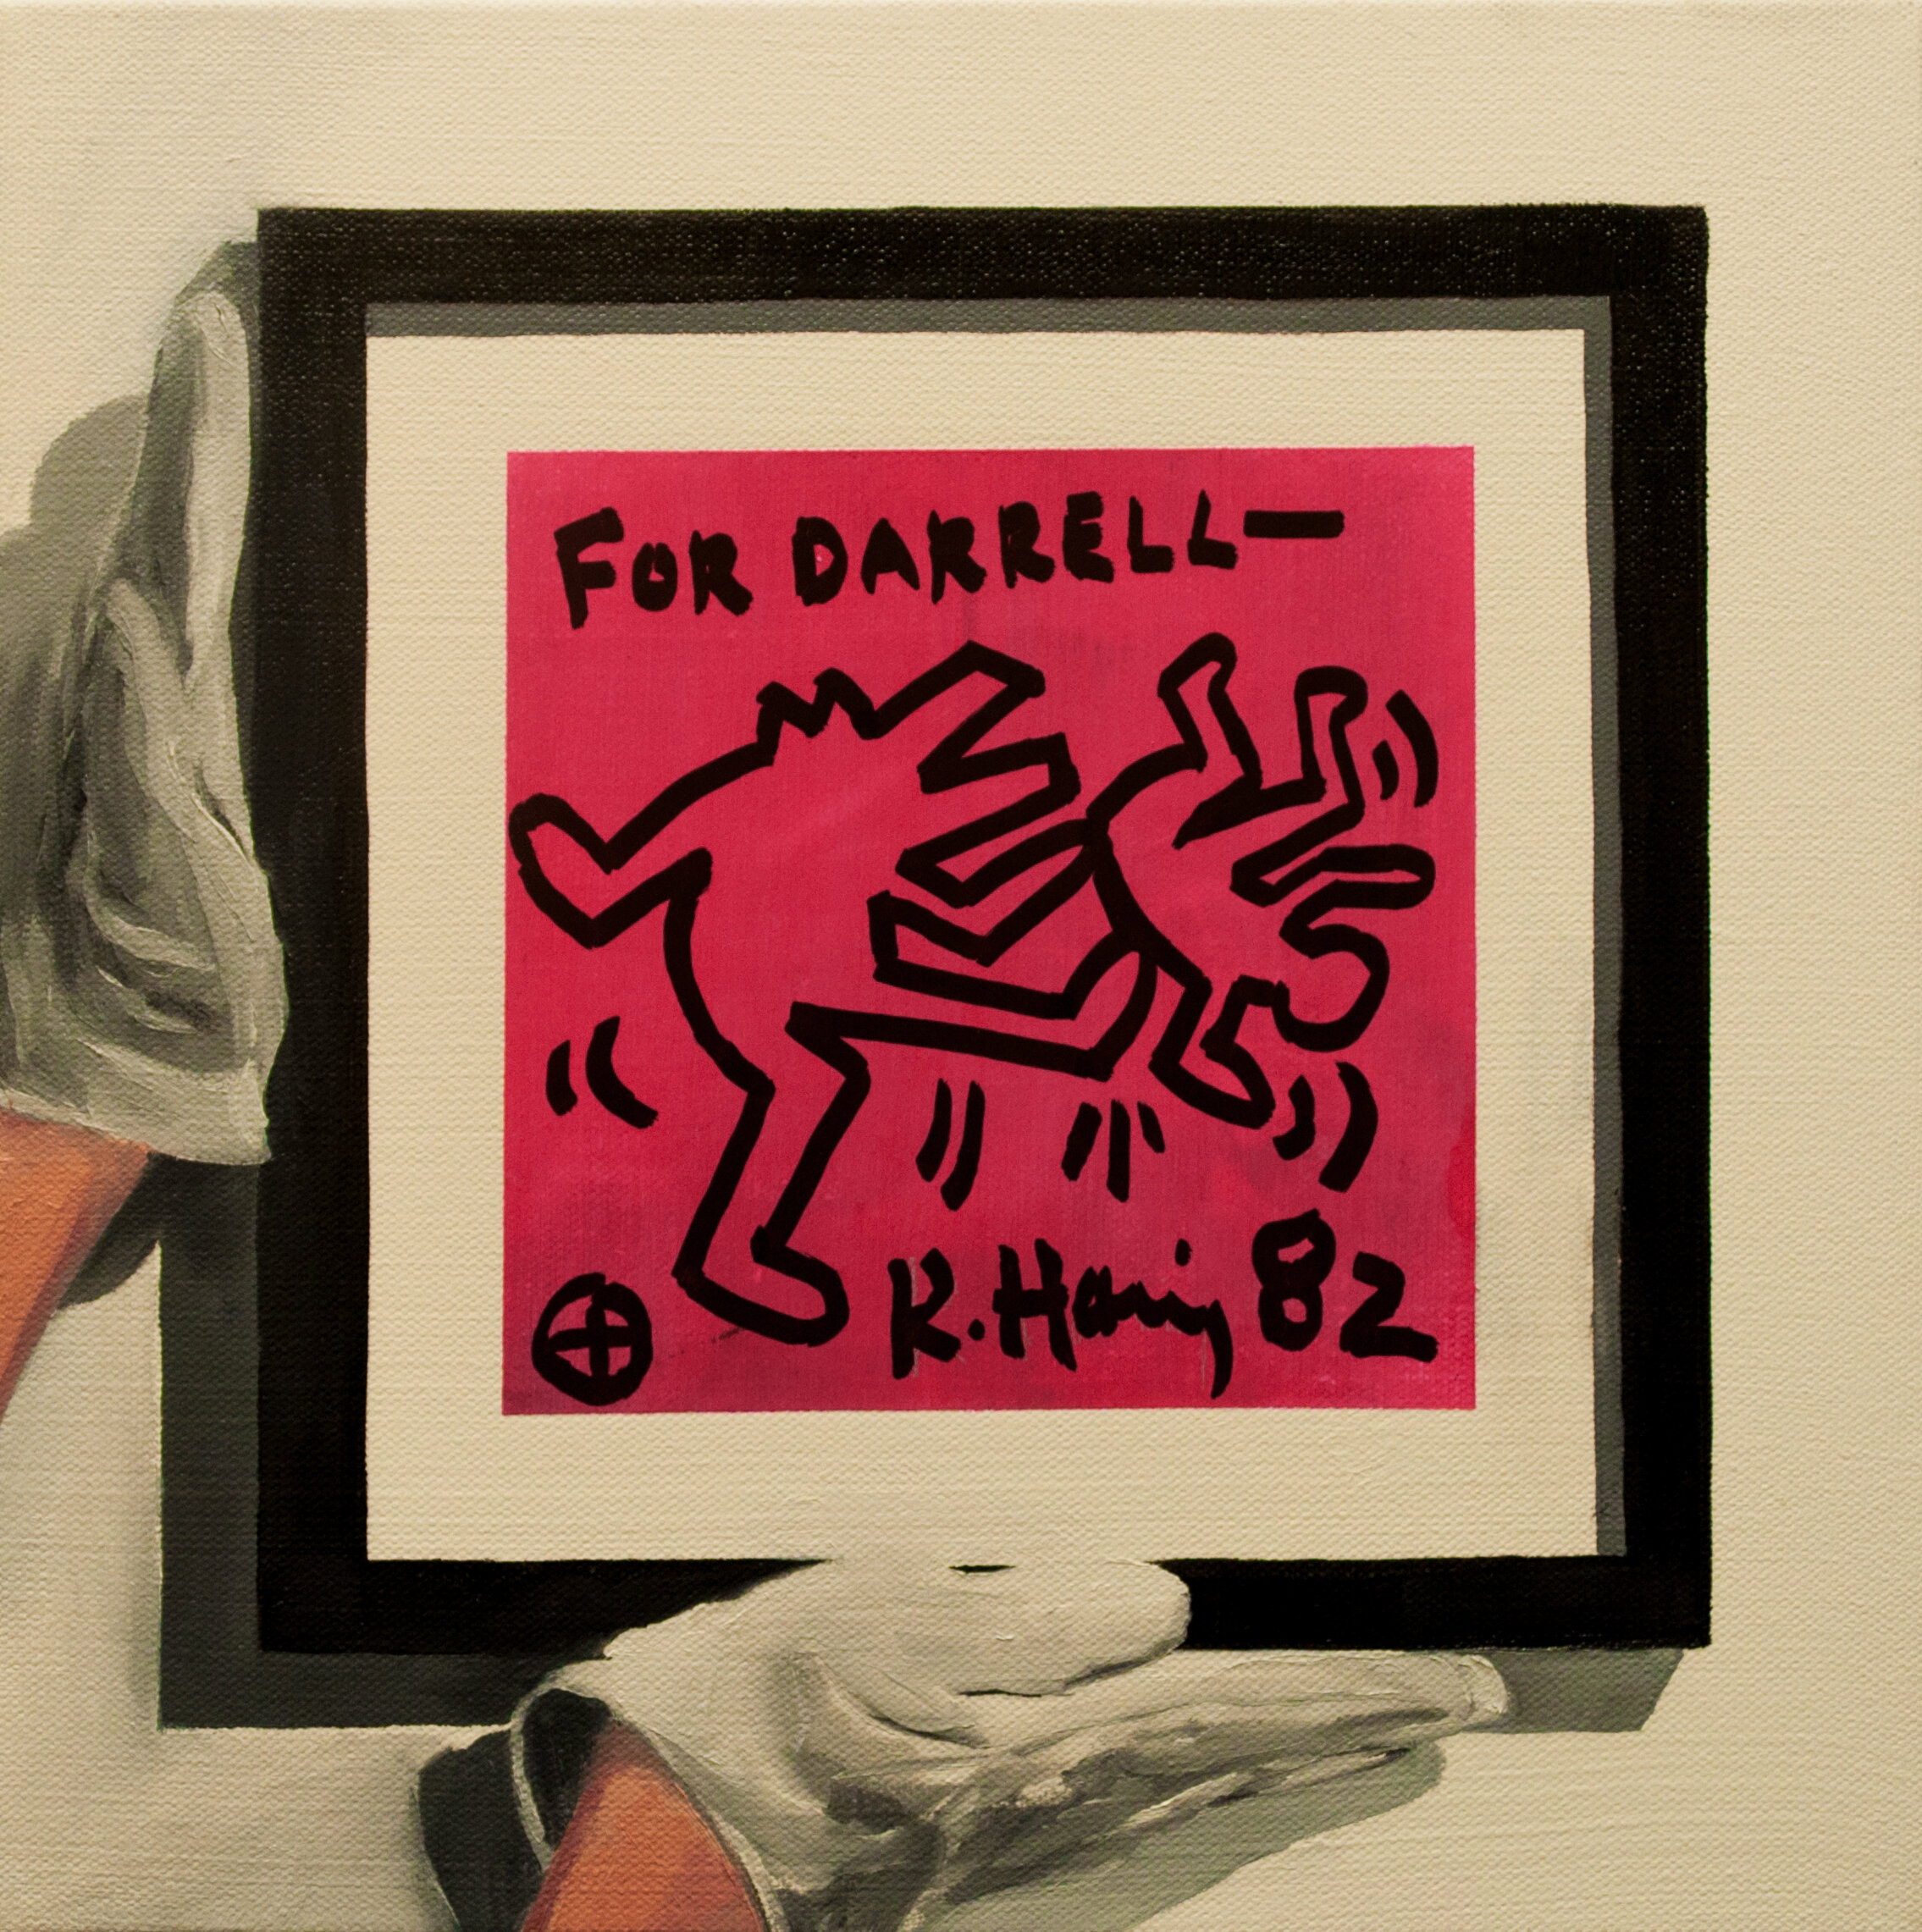 For Darrell , 1982. (2020)